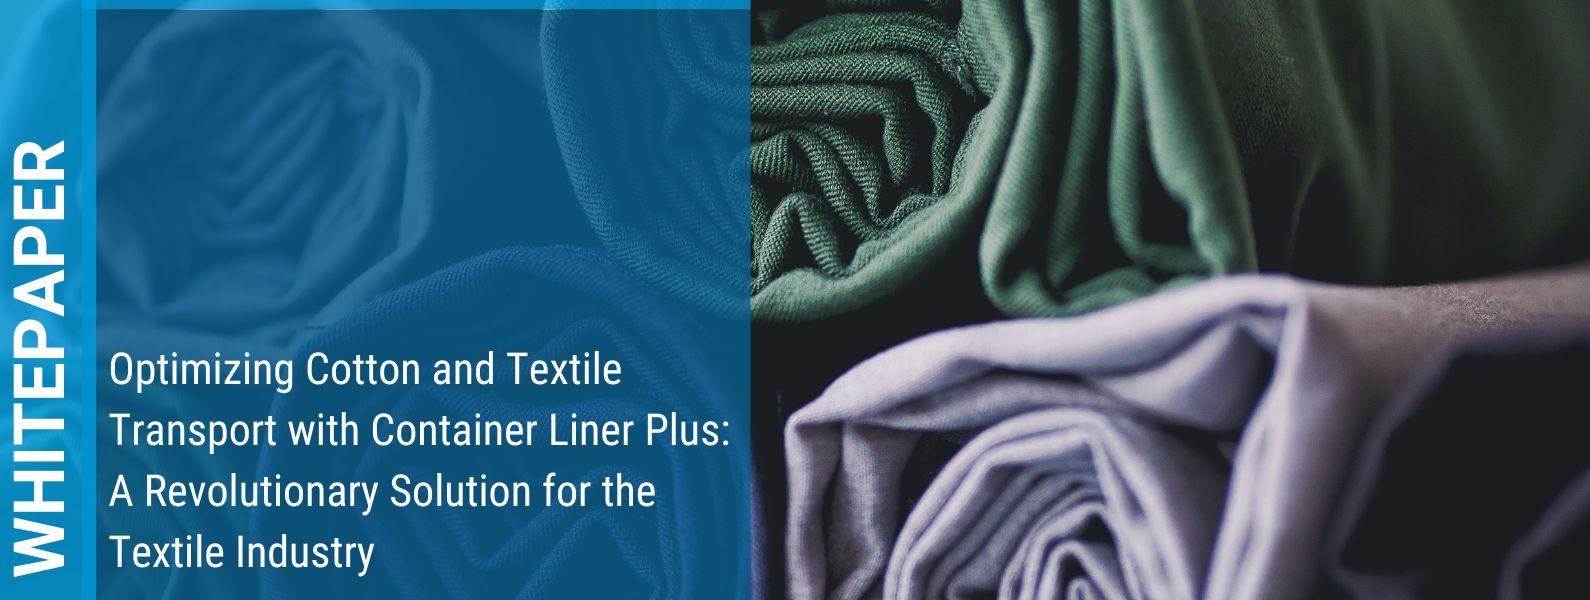 Whitepaper - Optimizing Cotton and Textile Transport with Container Liner Plus: A Revolutionary Solution for the Textile Industry